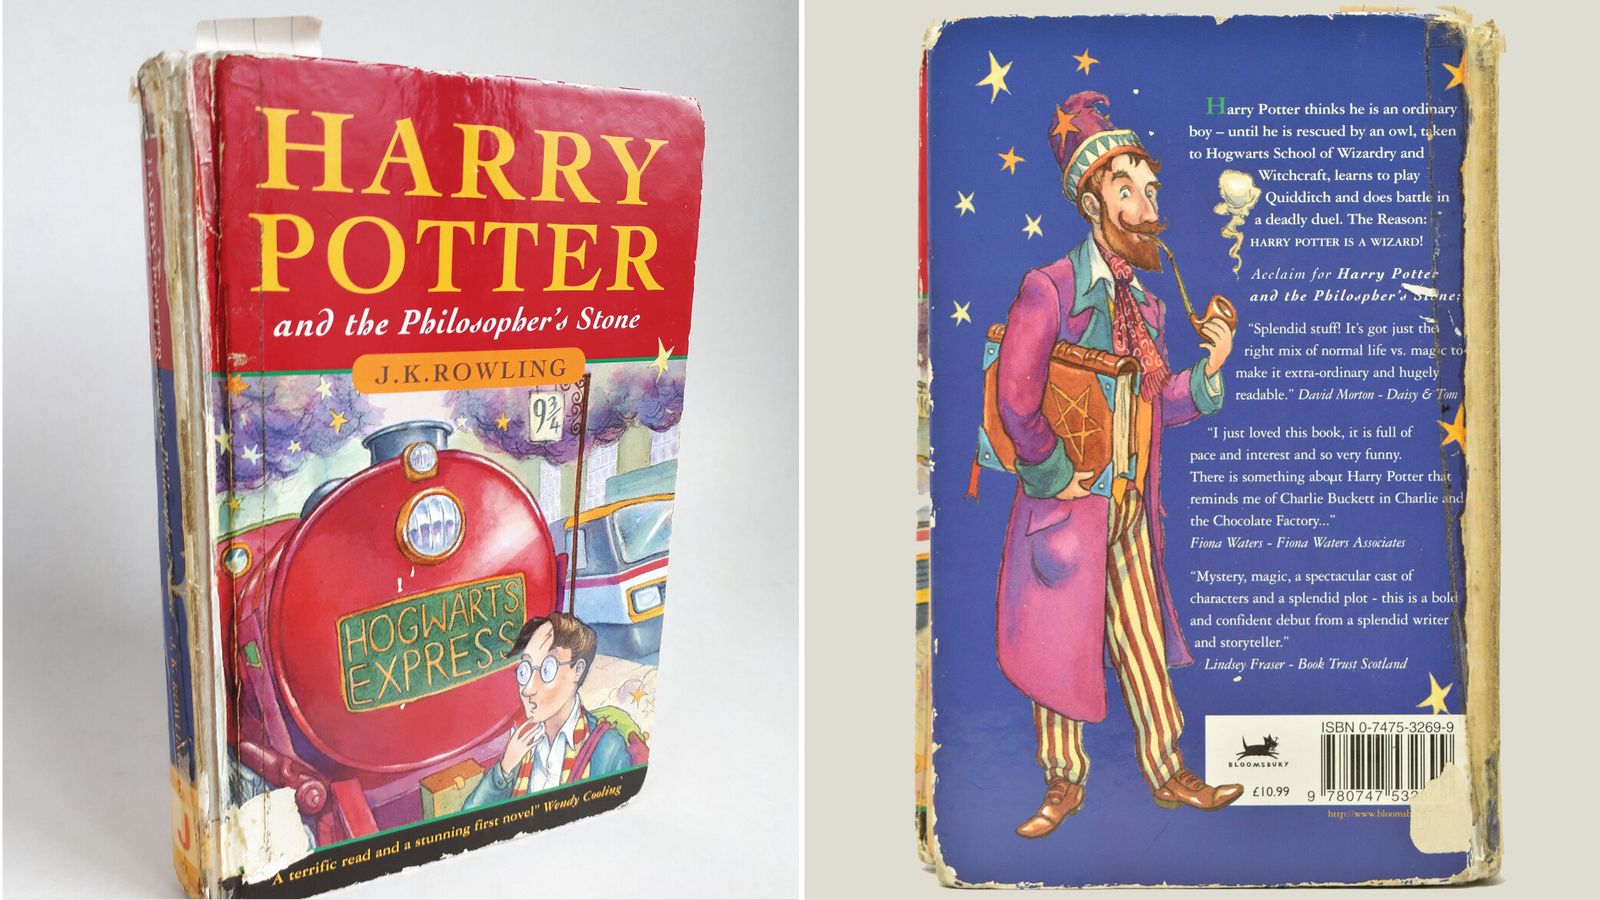 Harry Potter book bought for 30p sells for £10,500 at auction, UK News